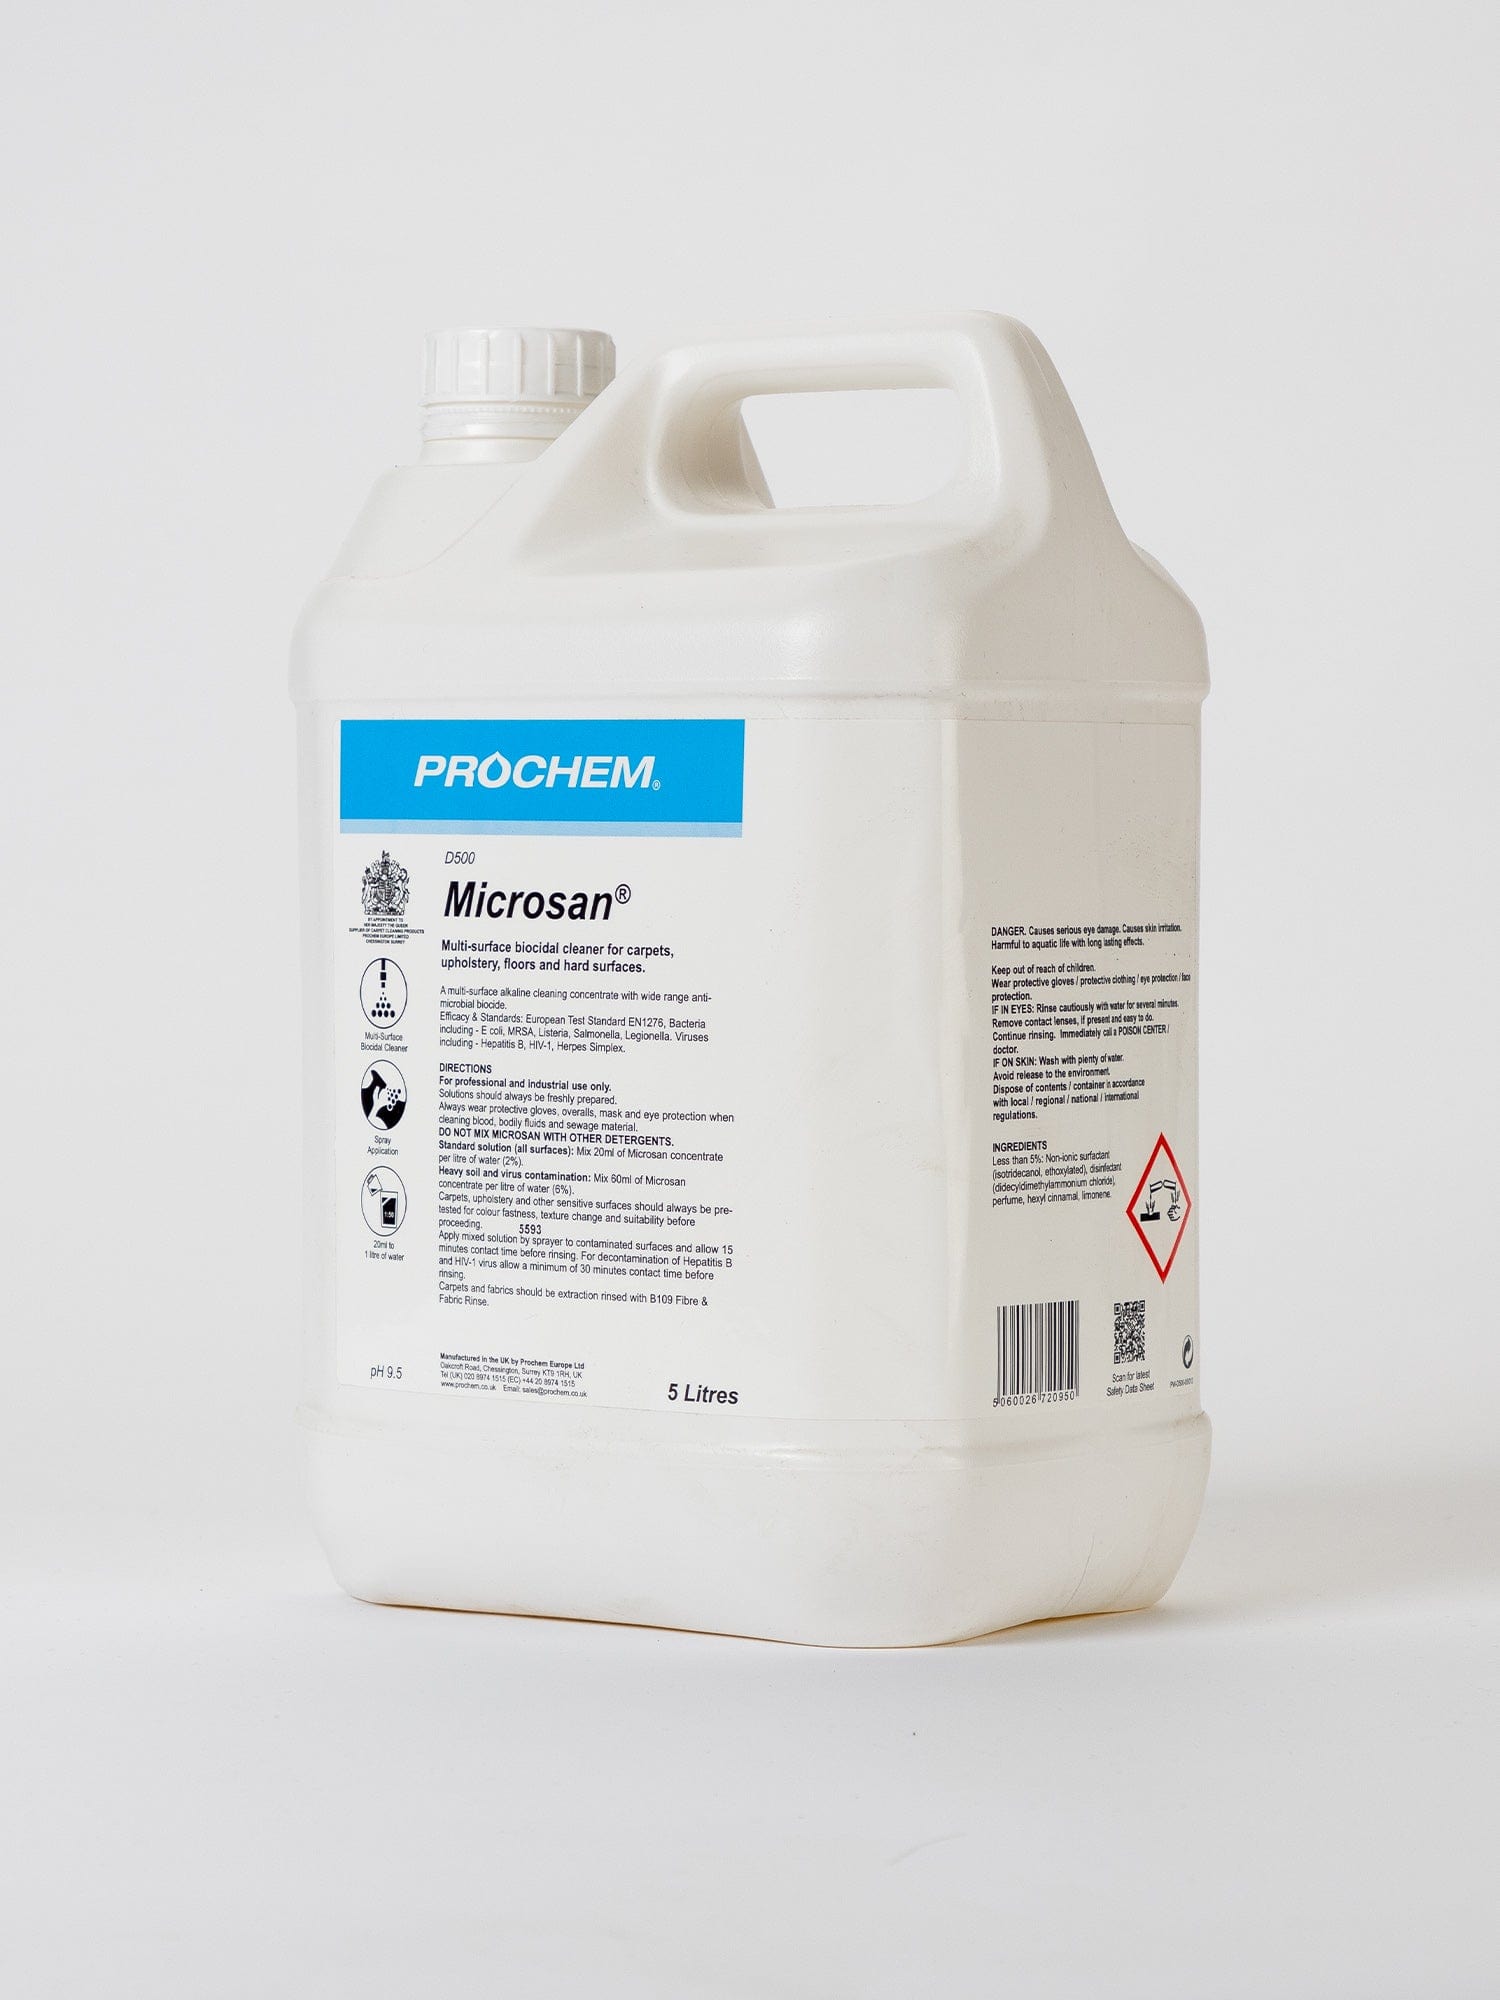 multi surface biocidal cleaner